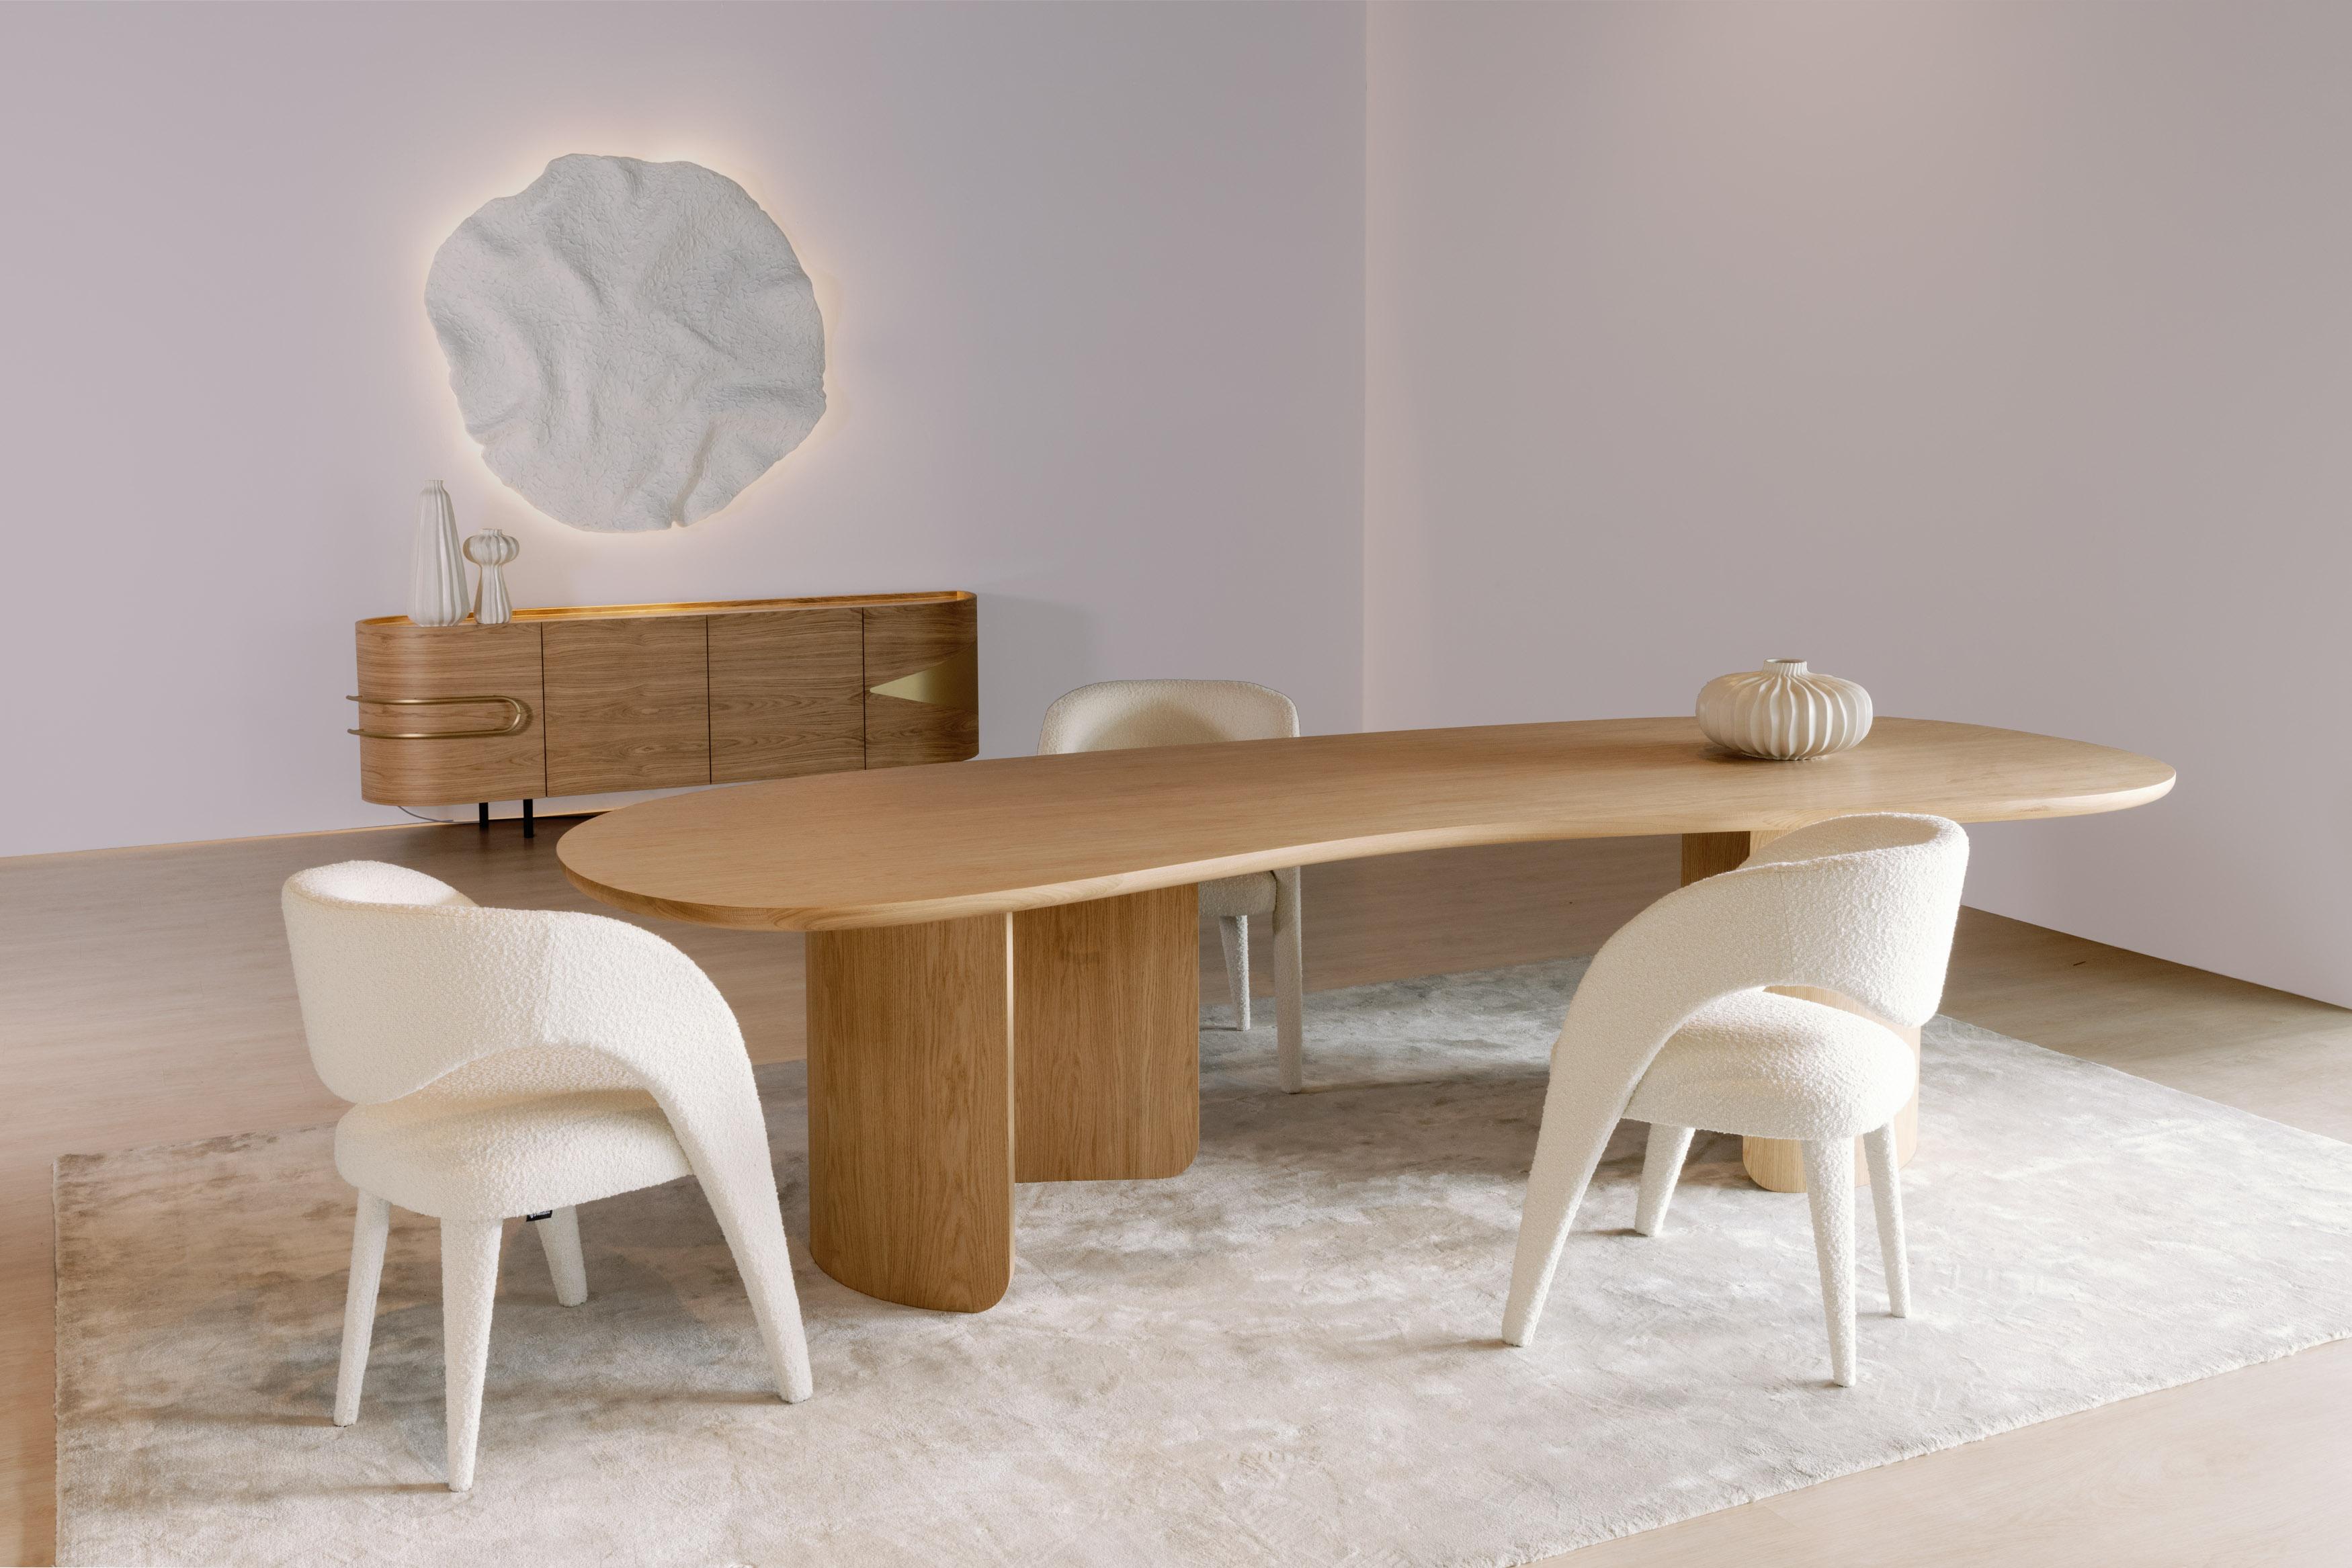 Armona Dining Table, Contemporary Collection, Handcrafted in Portugal - Europe by Greenapple.

Designed by Rute Martins for the Contemporary Collection, the Armona wood dining table pays homage to the natural beauty and organic lines of Armona